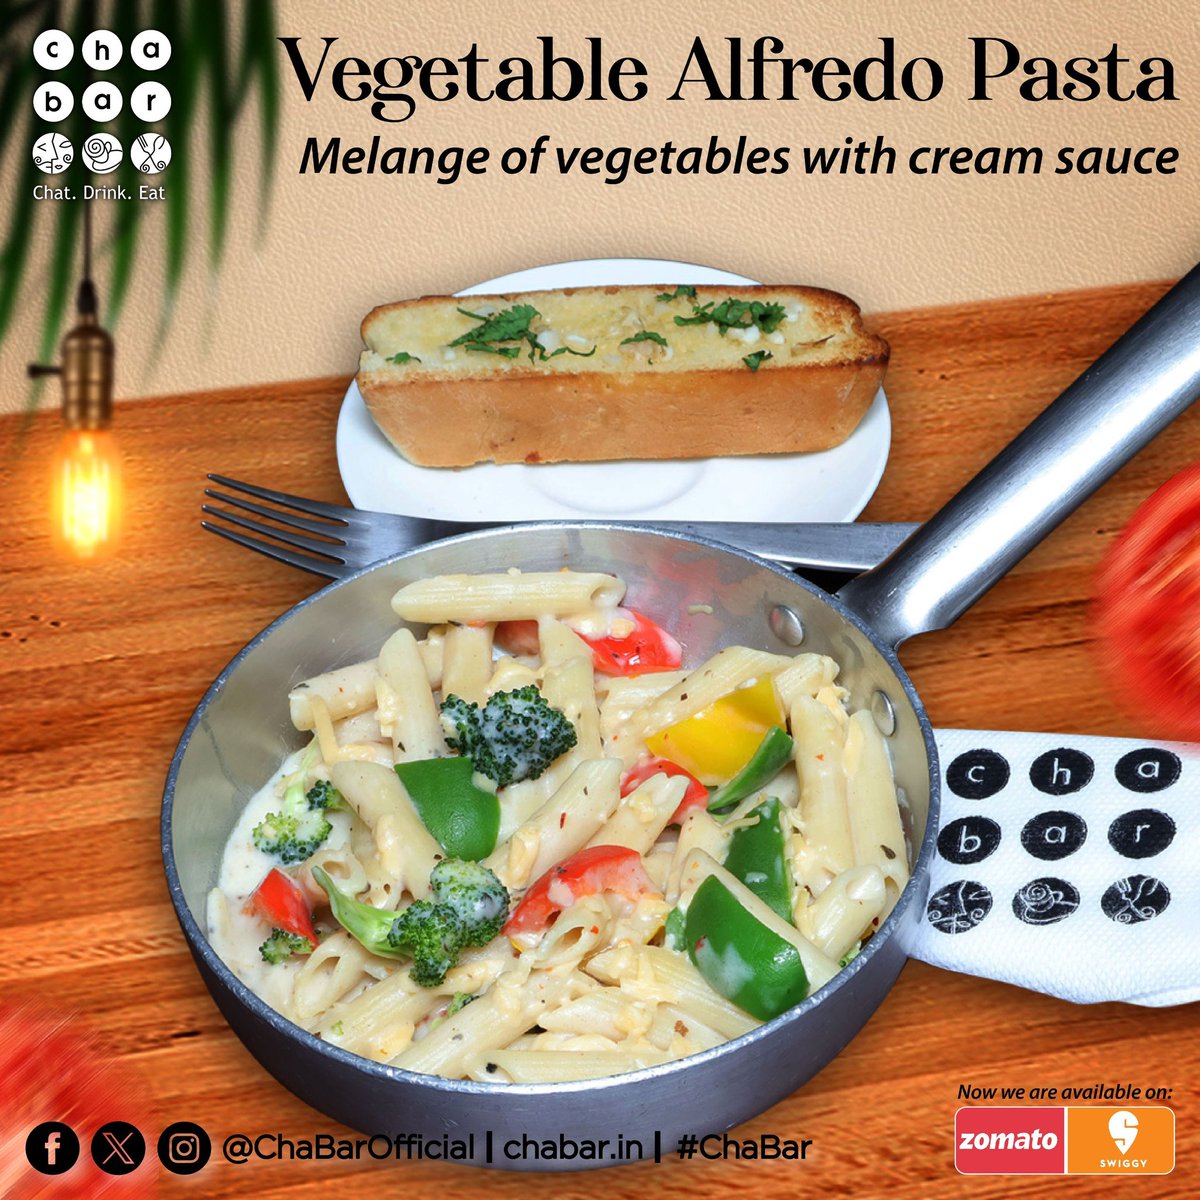 Give a healthy start to your day with our drool-worthy Vegetable Alfredo Pasta which is super creamy yet light and loaded with enough vegetables to make your salad jealous. 
Visit your nearest #ChaBar or order online from Zomato & Swiggy.
#VegetableAlfredoPasta #Pasta